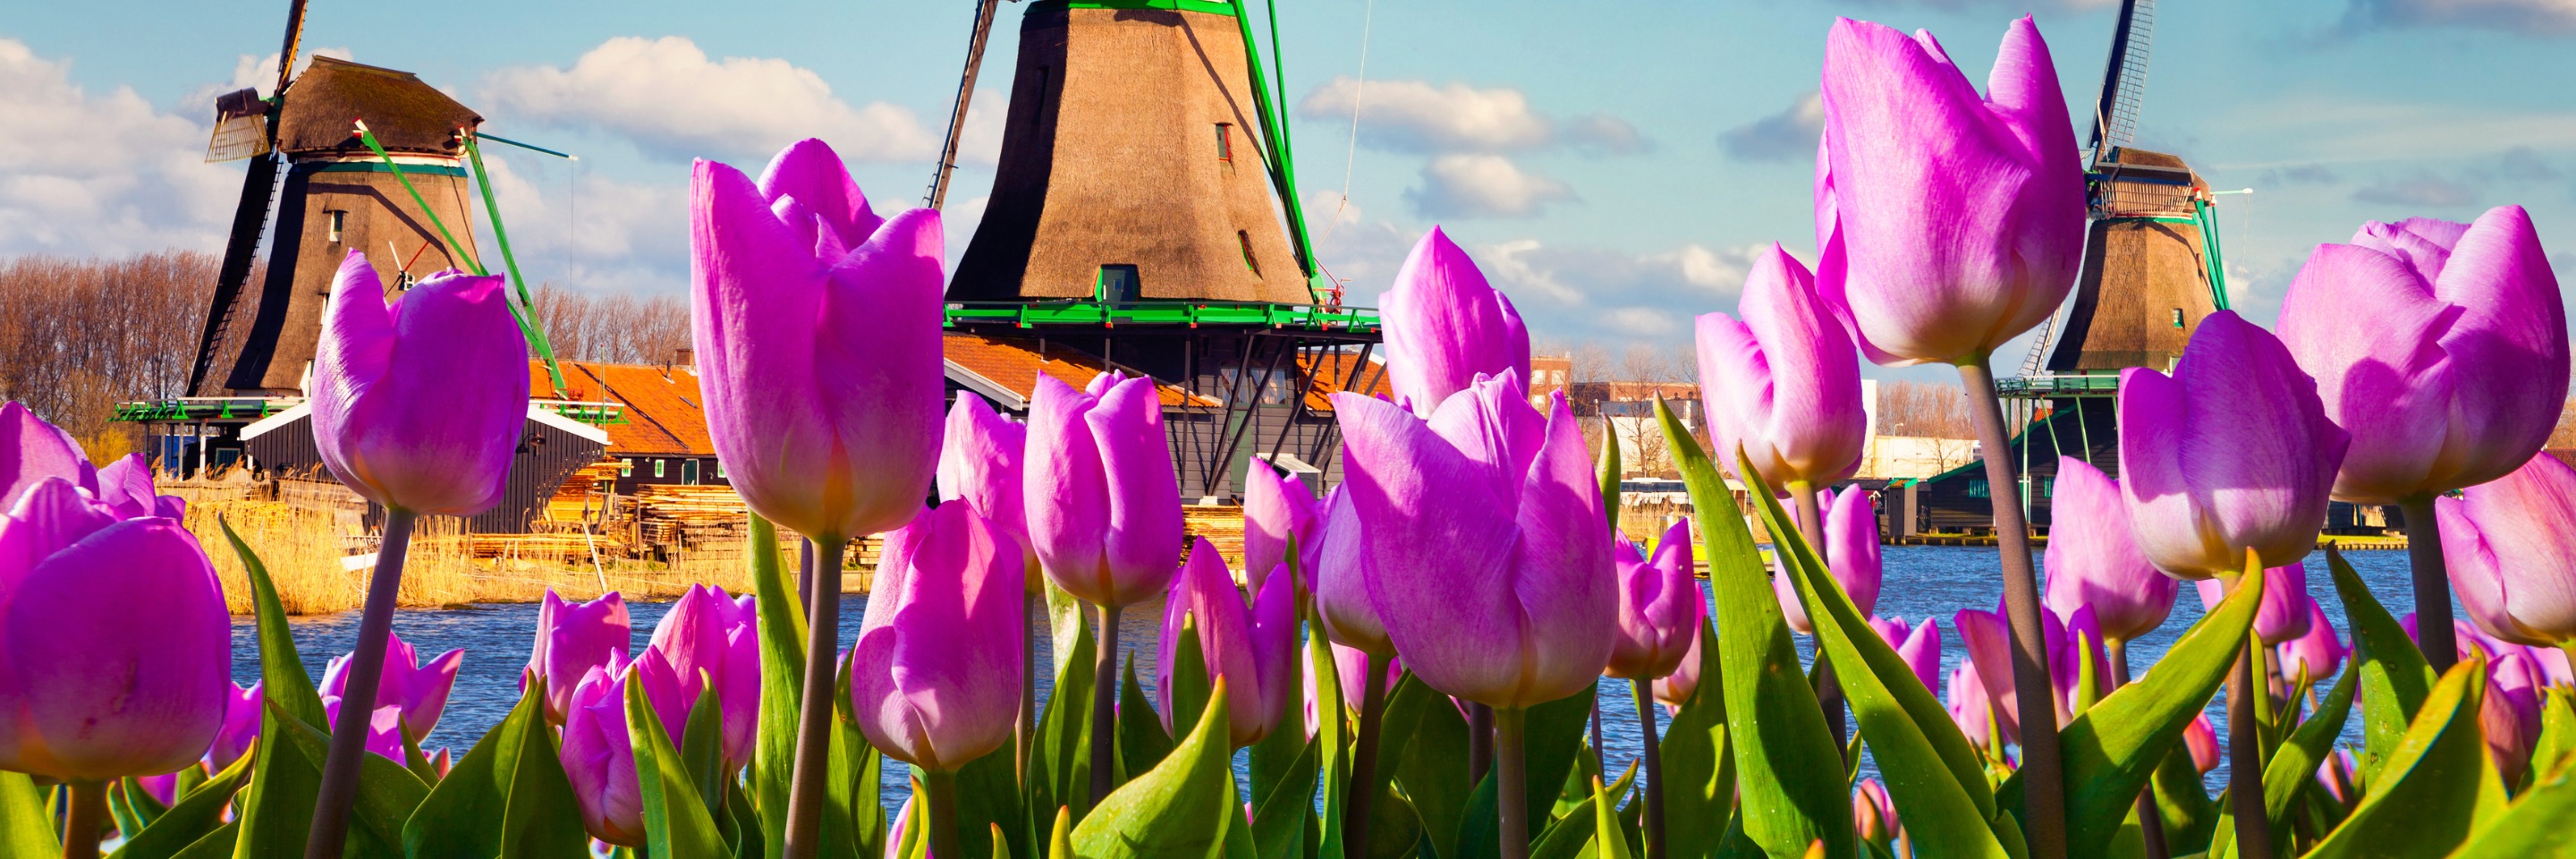 Tulip Time Cruise with 1 Night in Amsterdam for Beer Enthusiasts